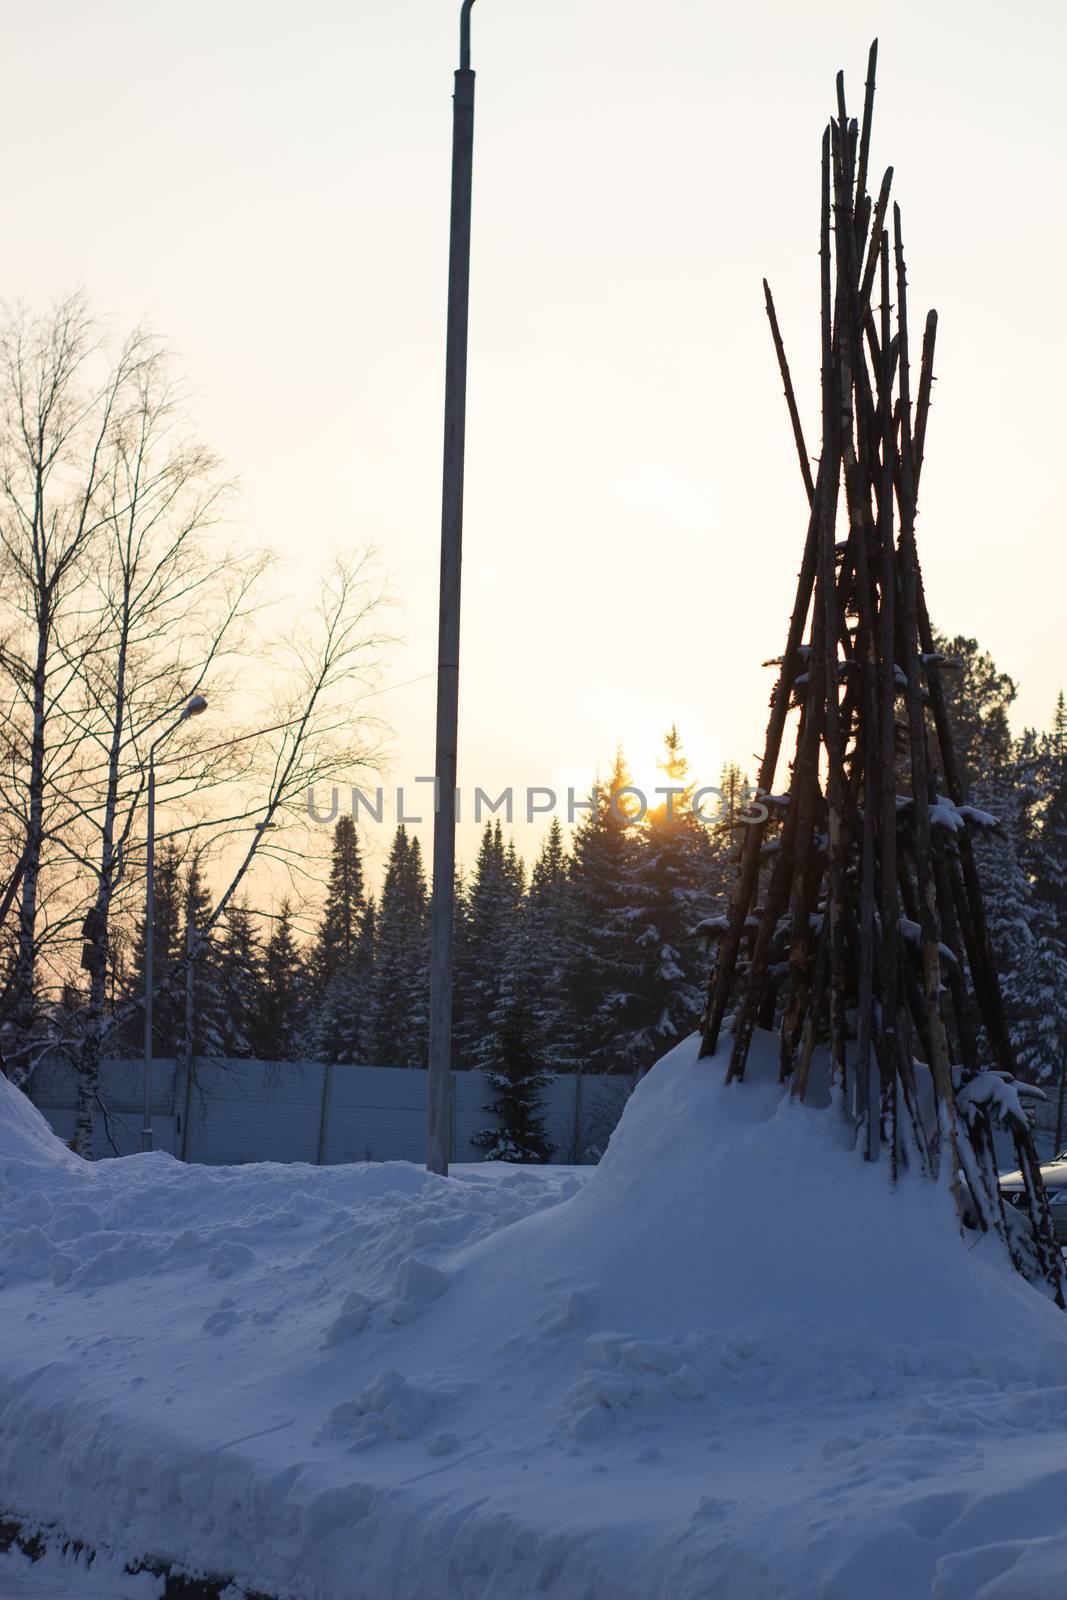 Tipi posts stuck in the thick snow in the middle of winter surrounded by lush green pines.